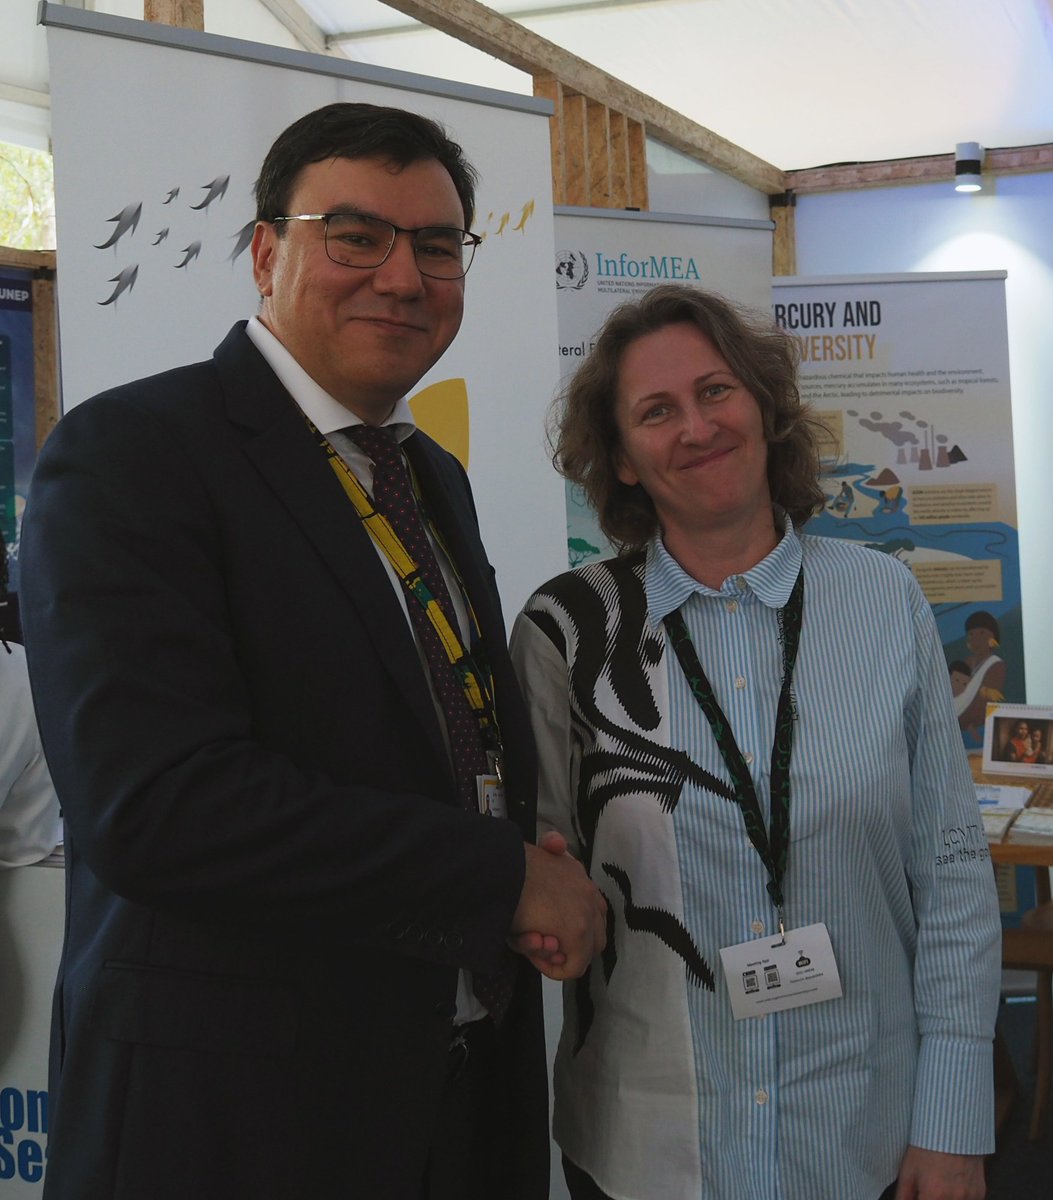 I was pleased to welcome @AzizAbduhakimov Minister of Ecology, Environmental Protection and Climate Change of🇺🇿, at out exhibition during #UNEA6. I am looking forward to Uzbekistan joining #minamataMEA